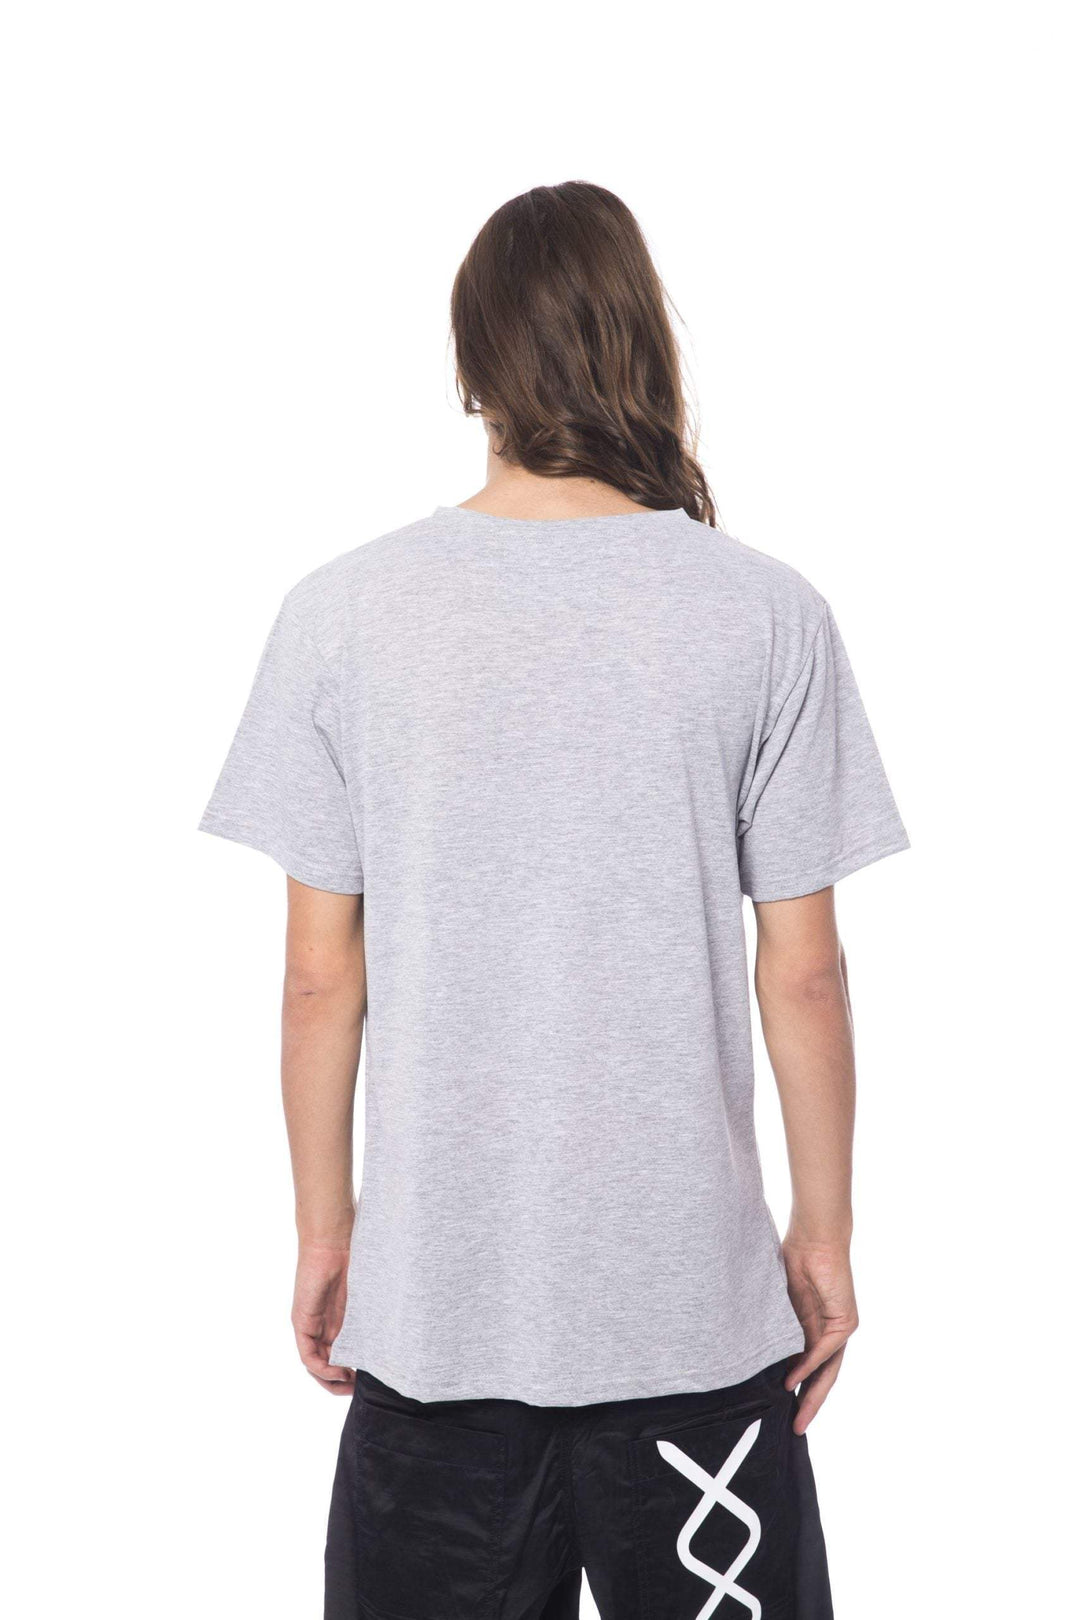 Nicolo Tonetto round neck printed  T-shirt #men, feed-agegroup-adult, feed-color-grey, feed-gender-male, Gray, M, Nicolo Tonetto, S, T-shirts - Men - Clothing at SEYMAYKA